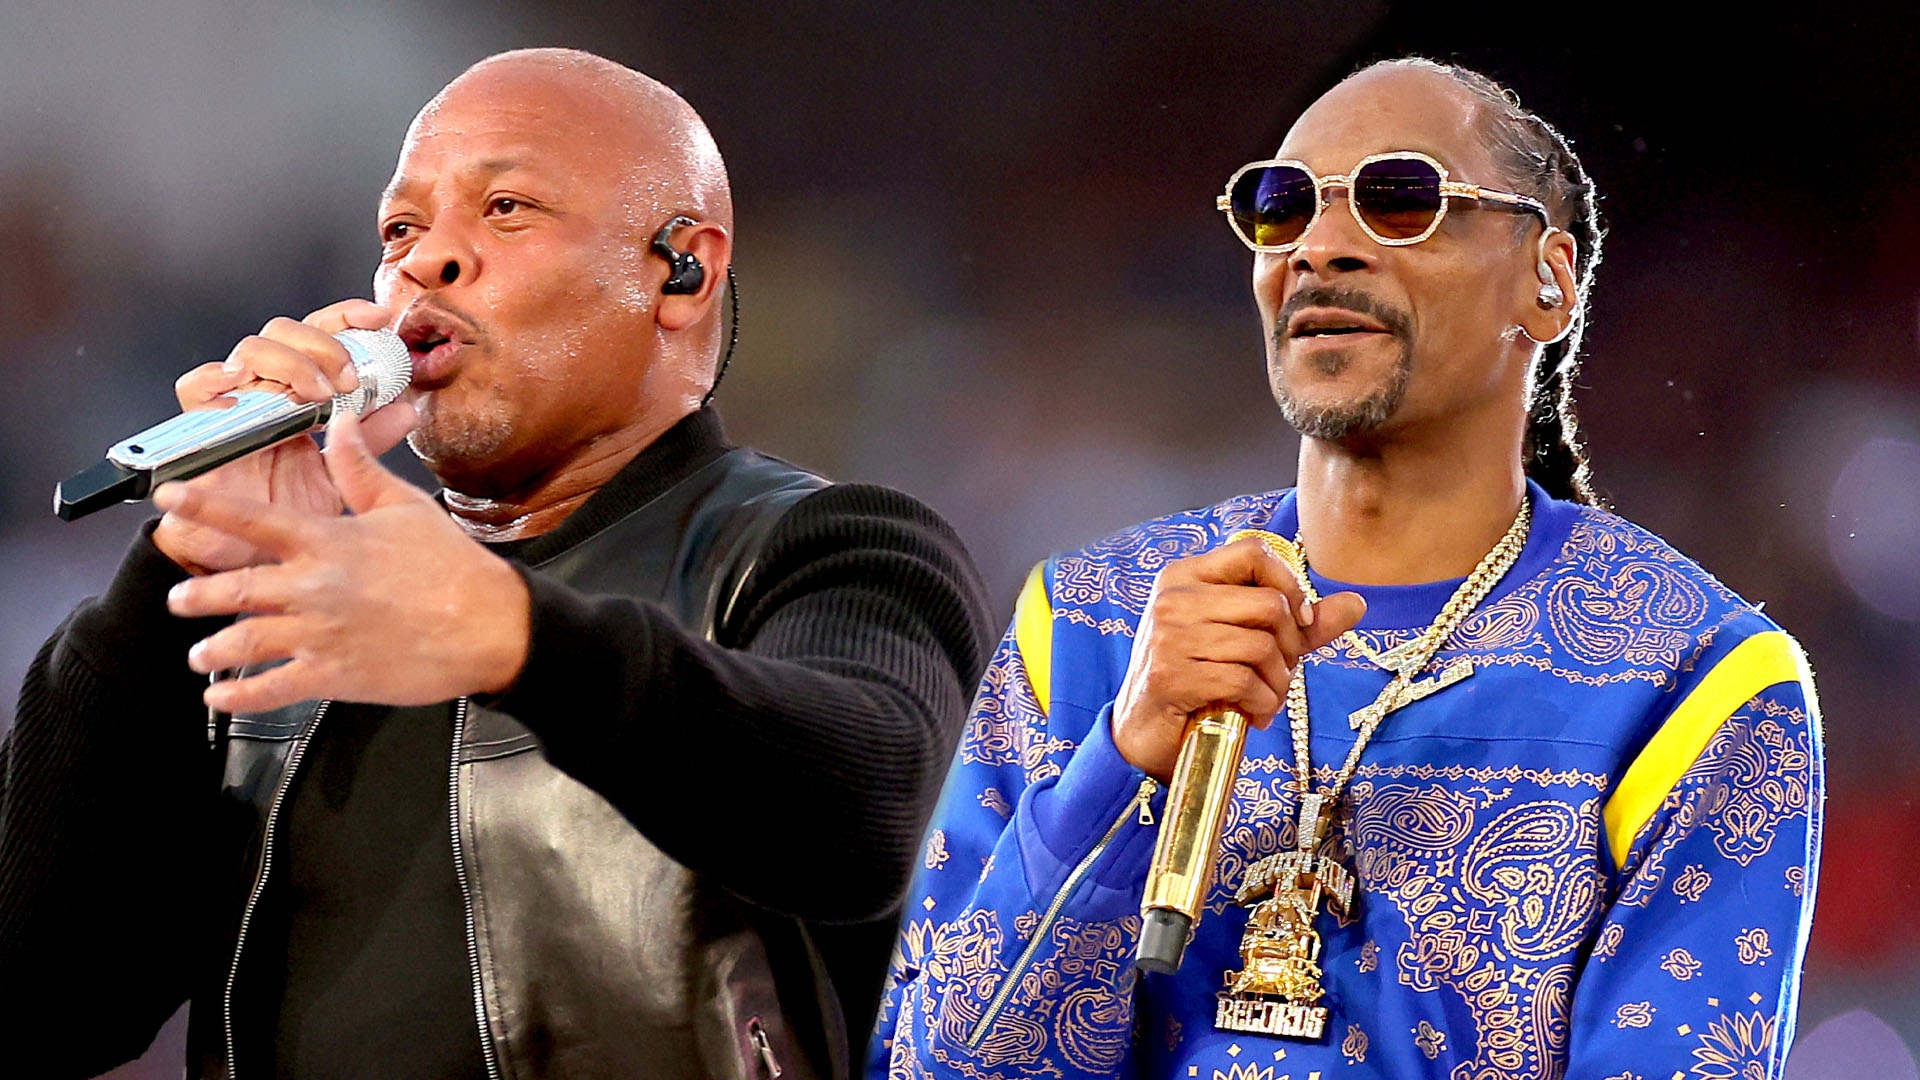 Halftime Review: Dre, Snoop and friends deliver epic show - WTOP News